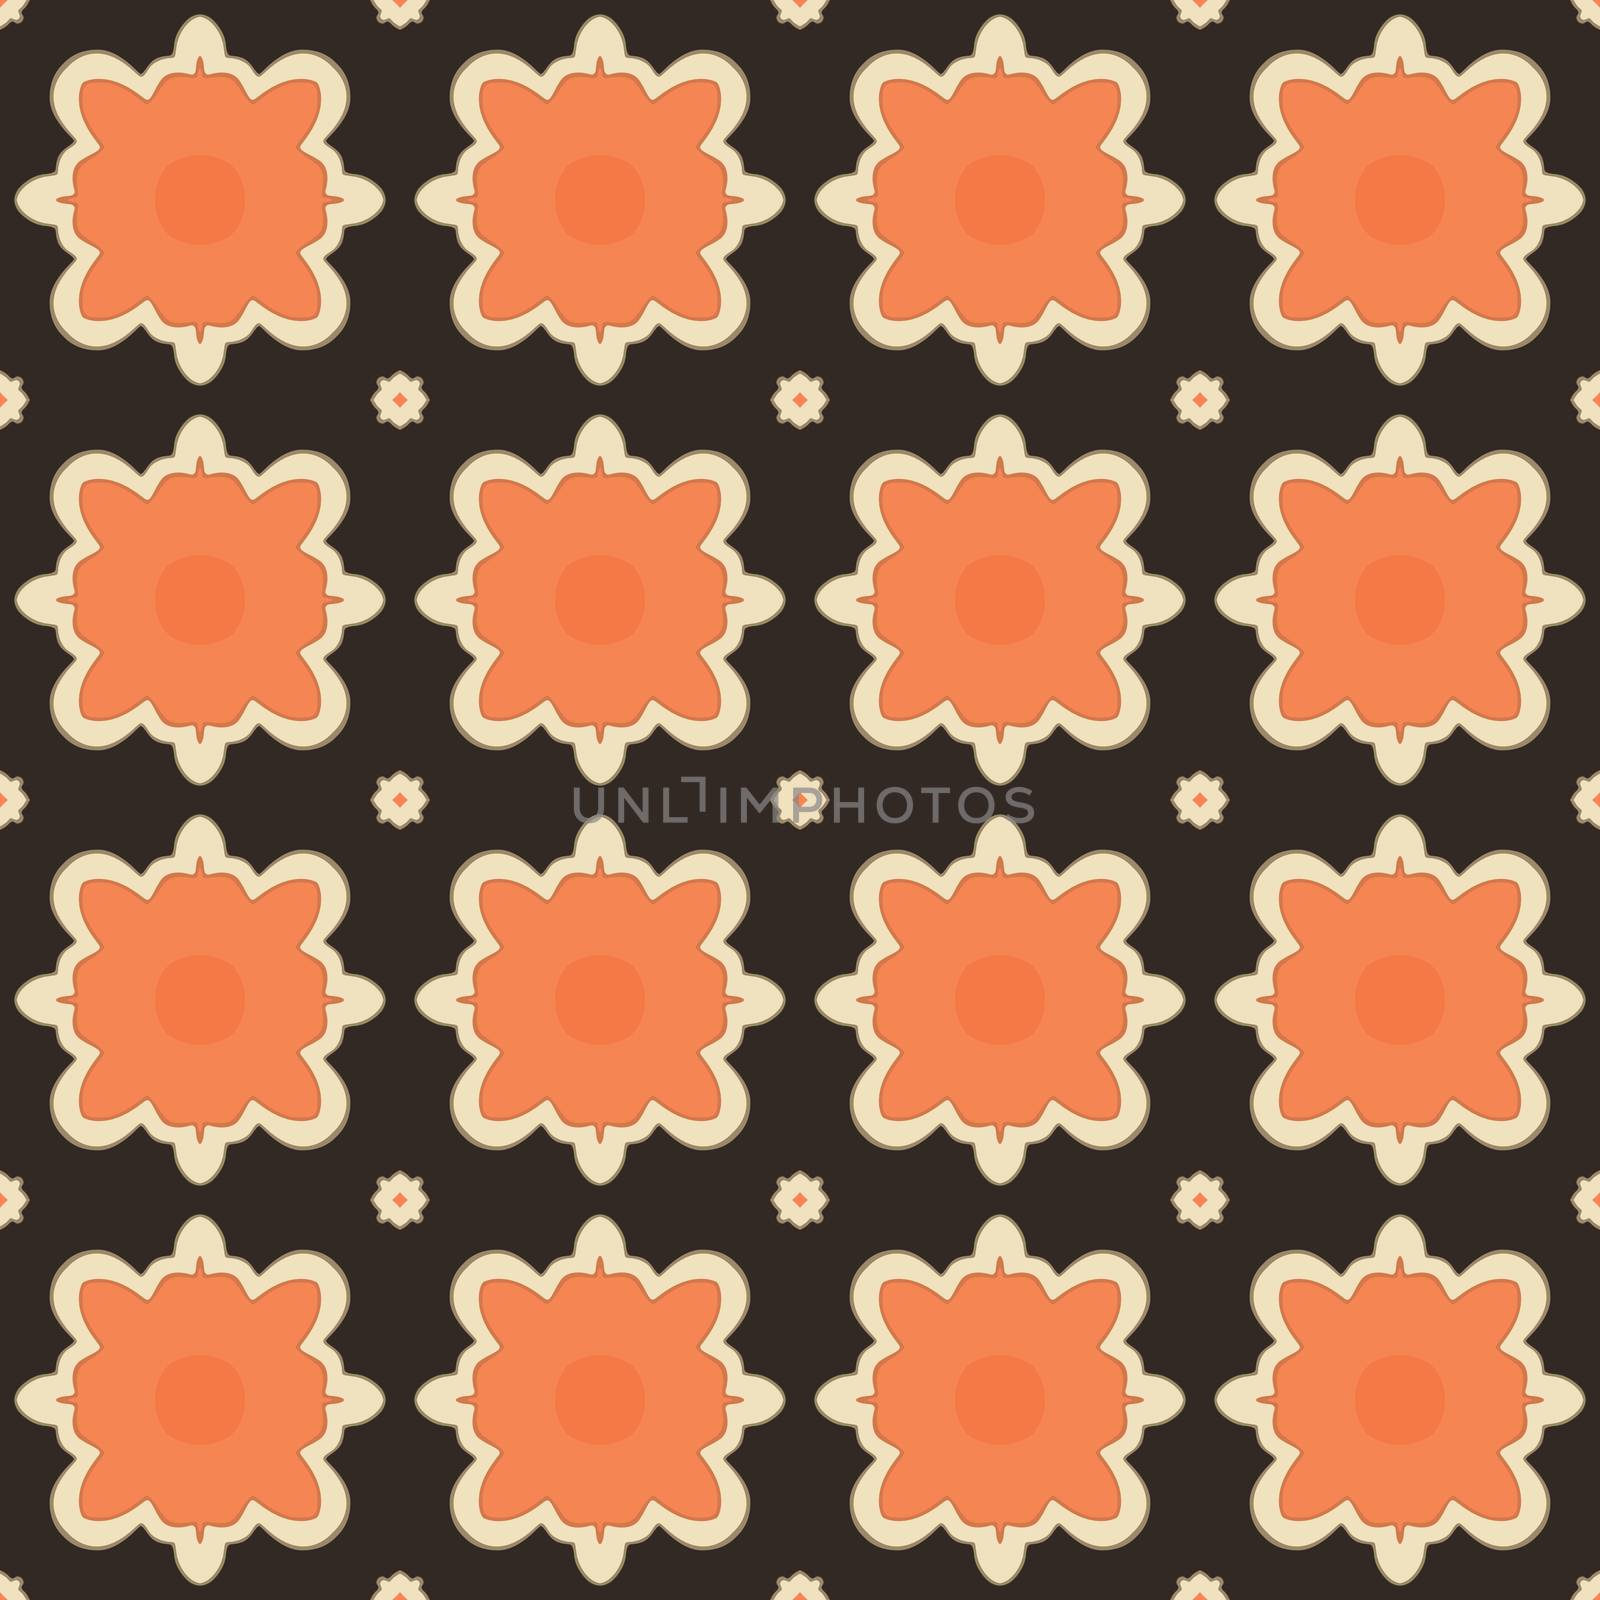 Seamless illustrated pattern made of abstract elements in beige, orange and black